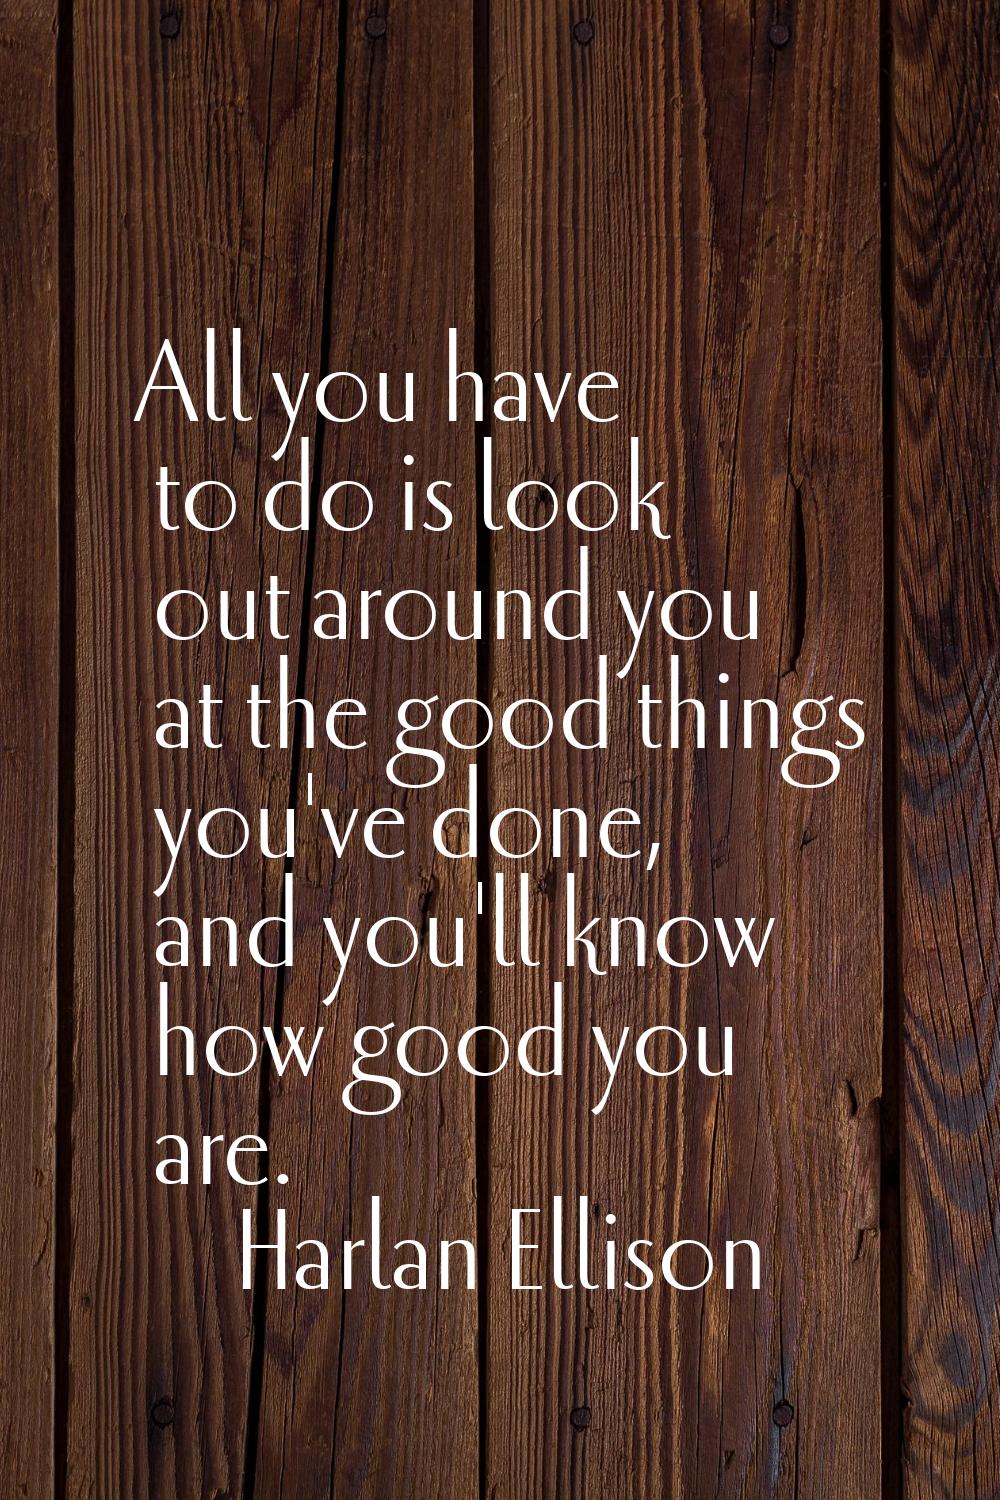 All you have to do is look out around you at the good things you've done, and you'll know how good 